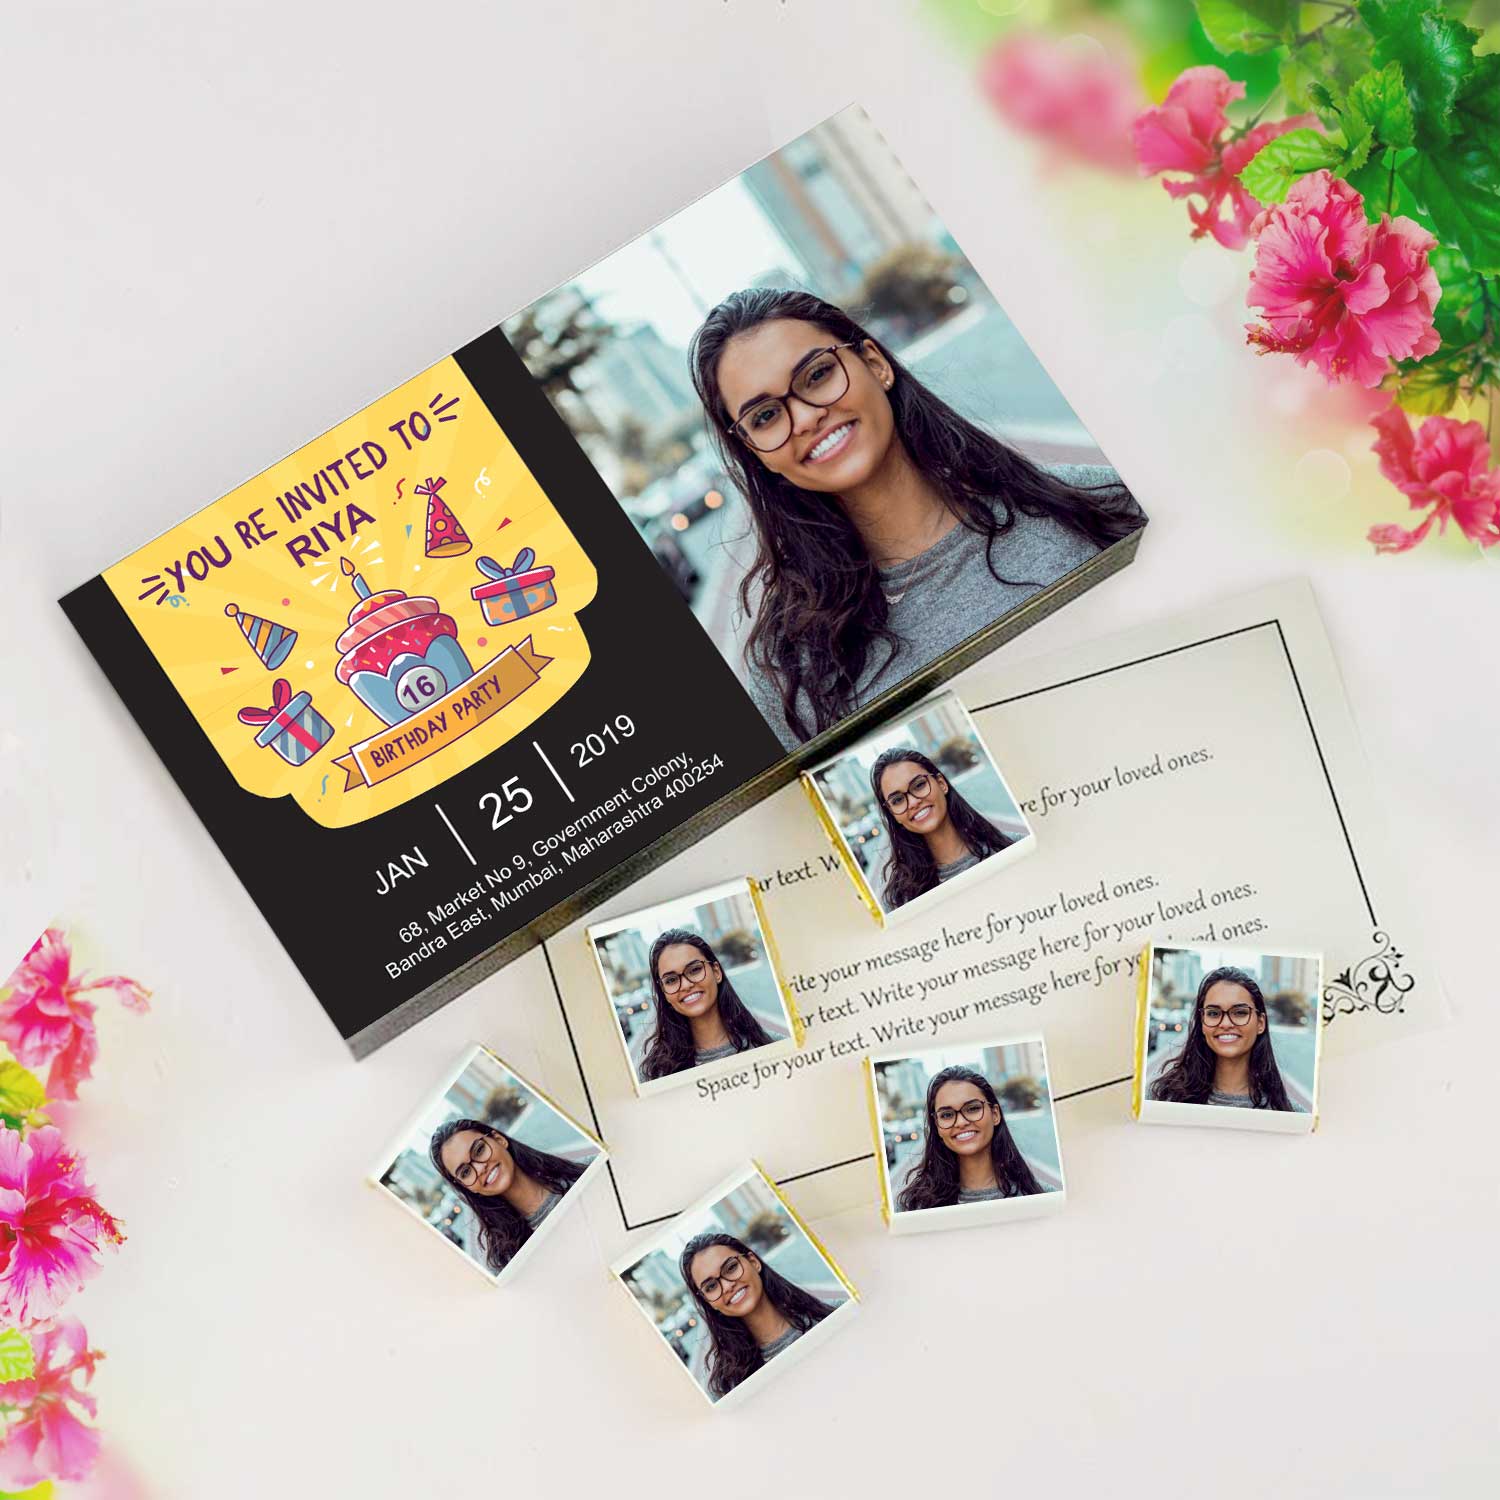 PERSONALIZED INVITATION GIFTS FOR "SWEET 16" BIRTHDAY PARTY    Chocolate box for birthday invitation gift.   Birthday invitation for girlfriend box.